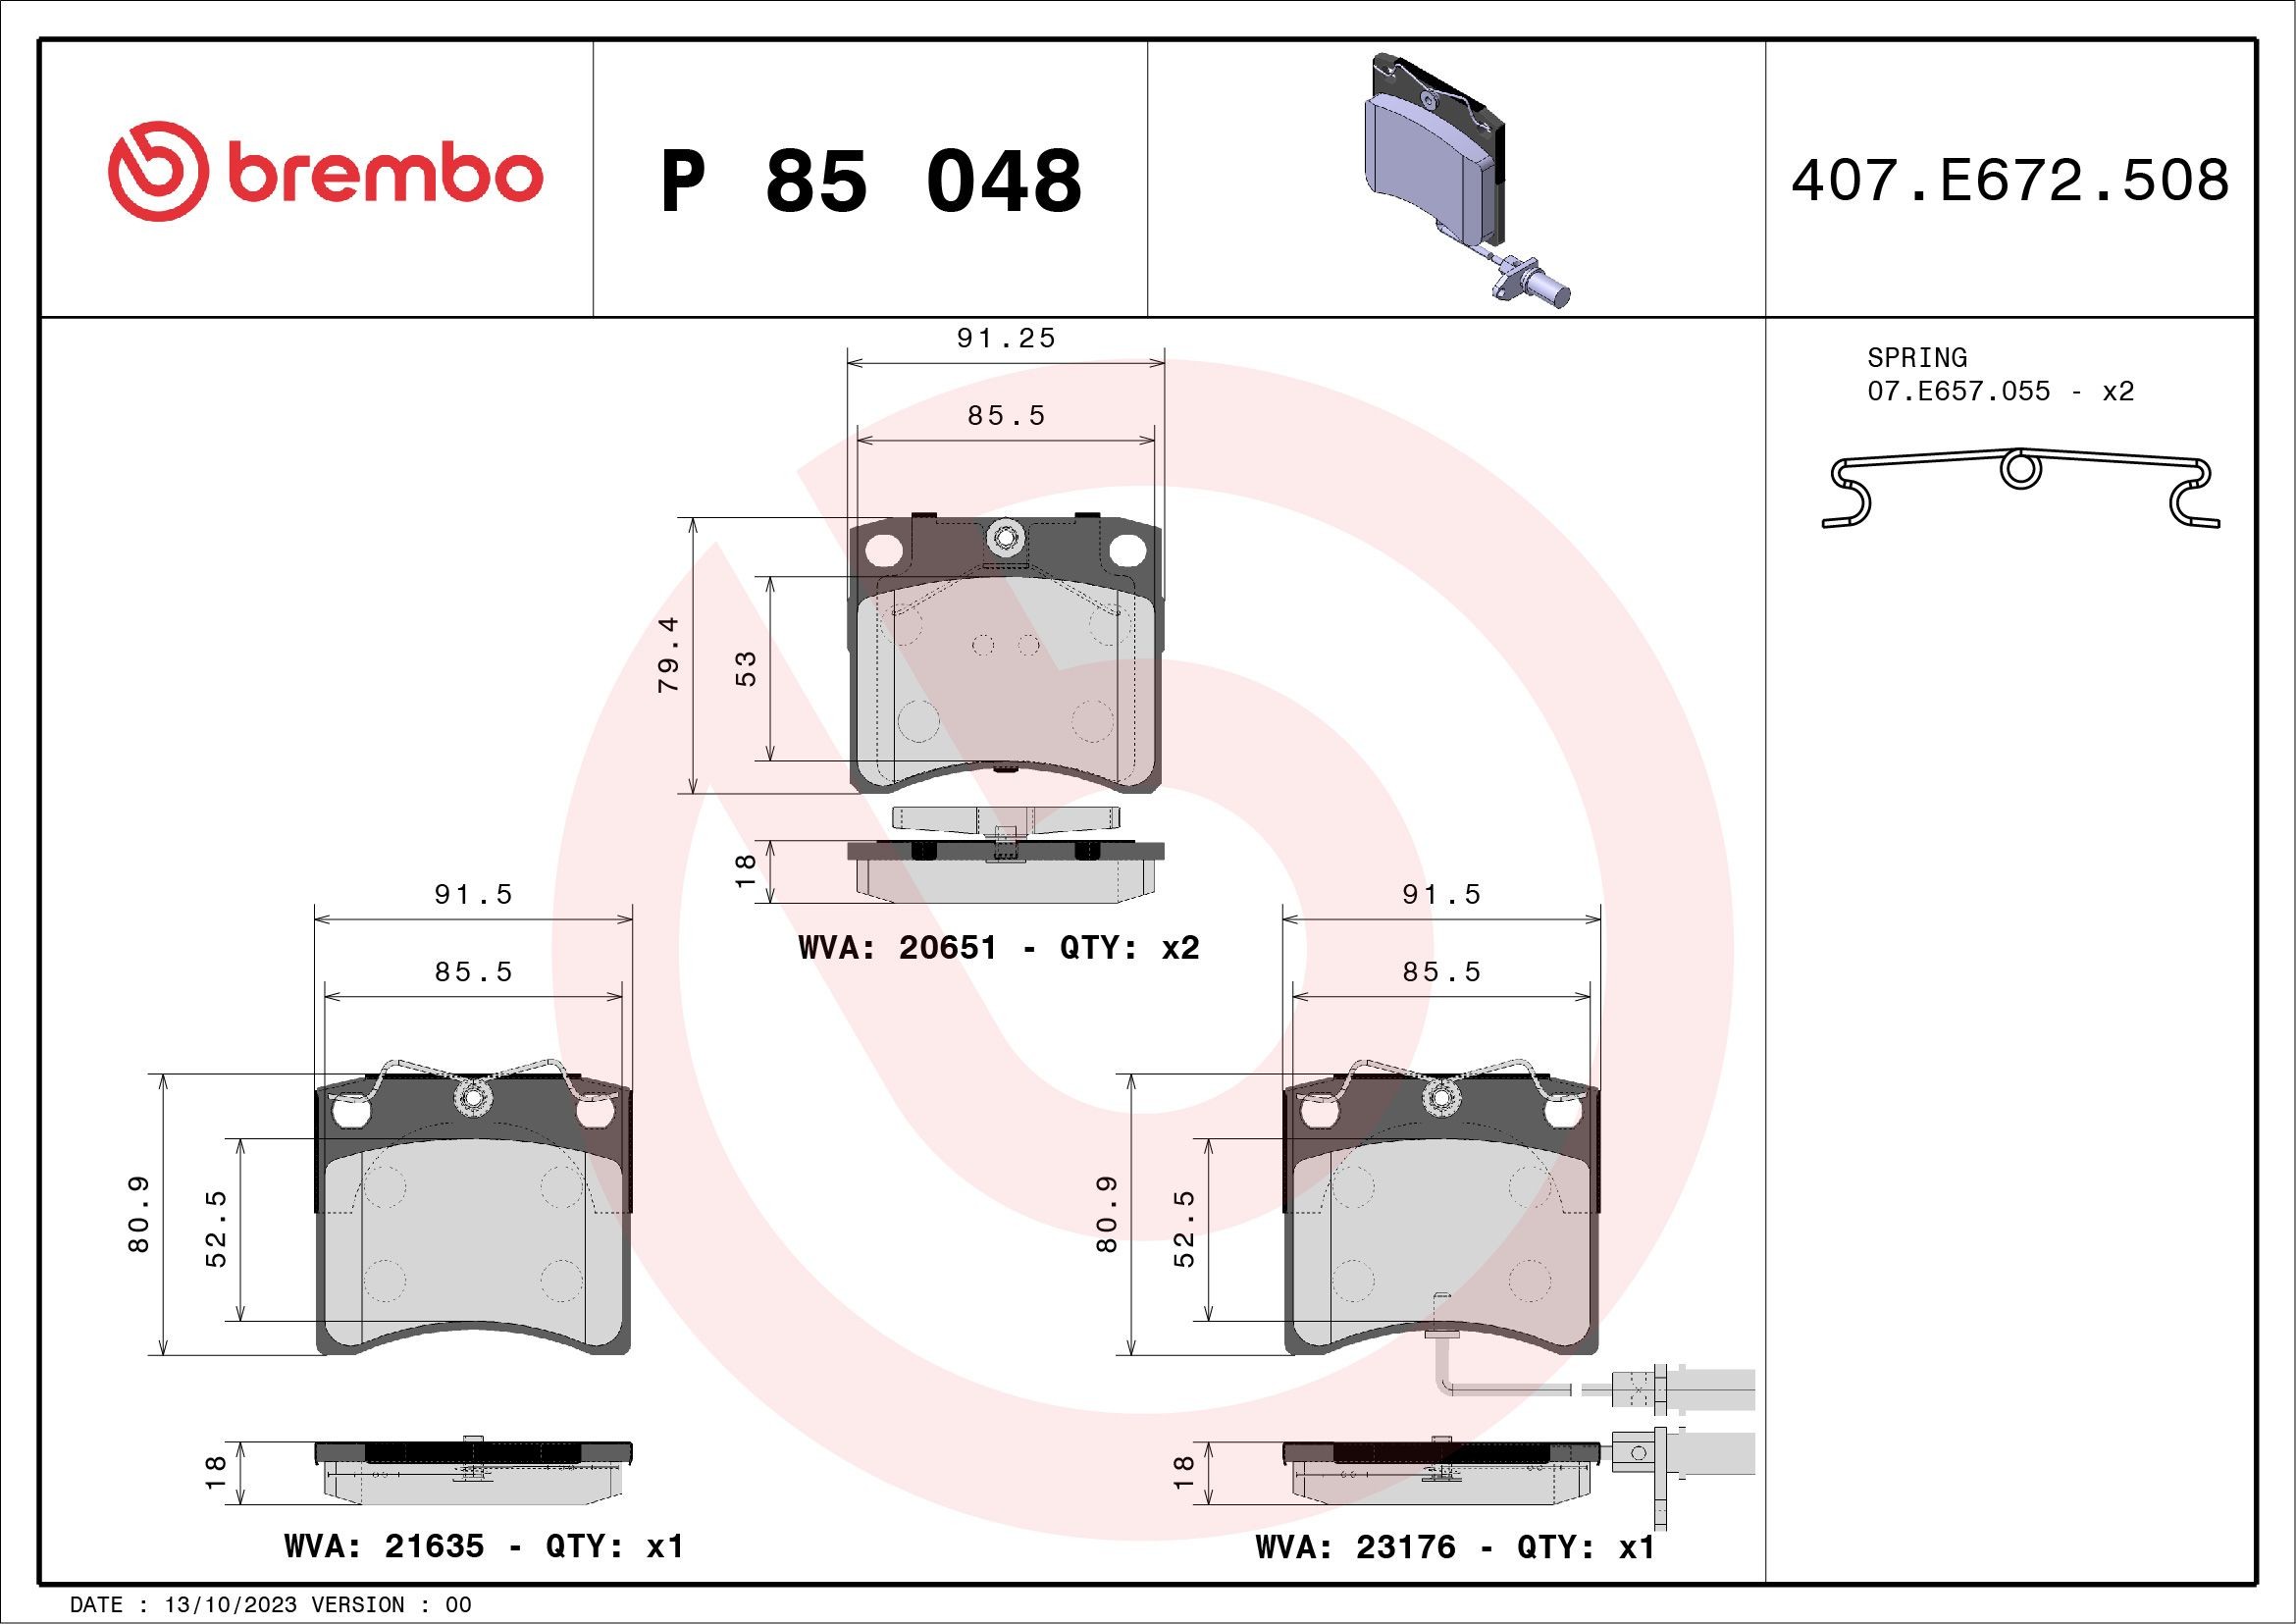 BREMBO P 85 048 Brake pad set incl. wear warning contact, with accessories